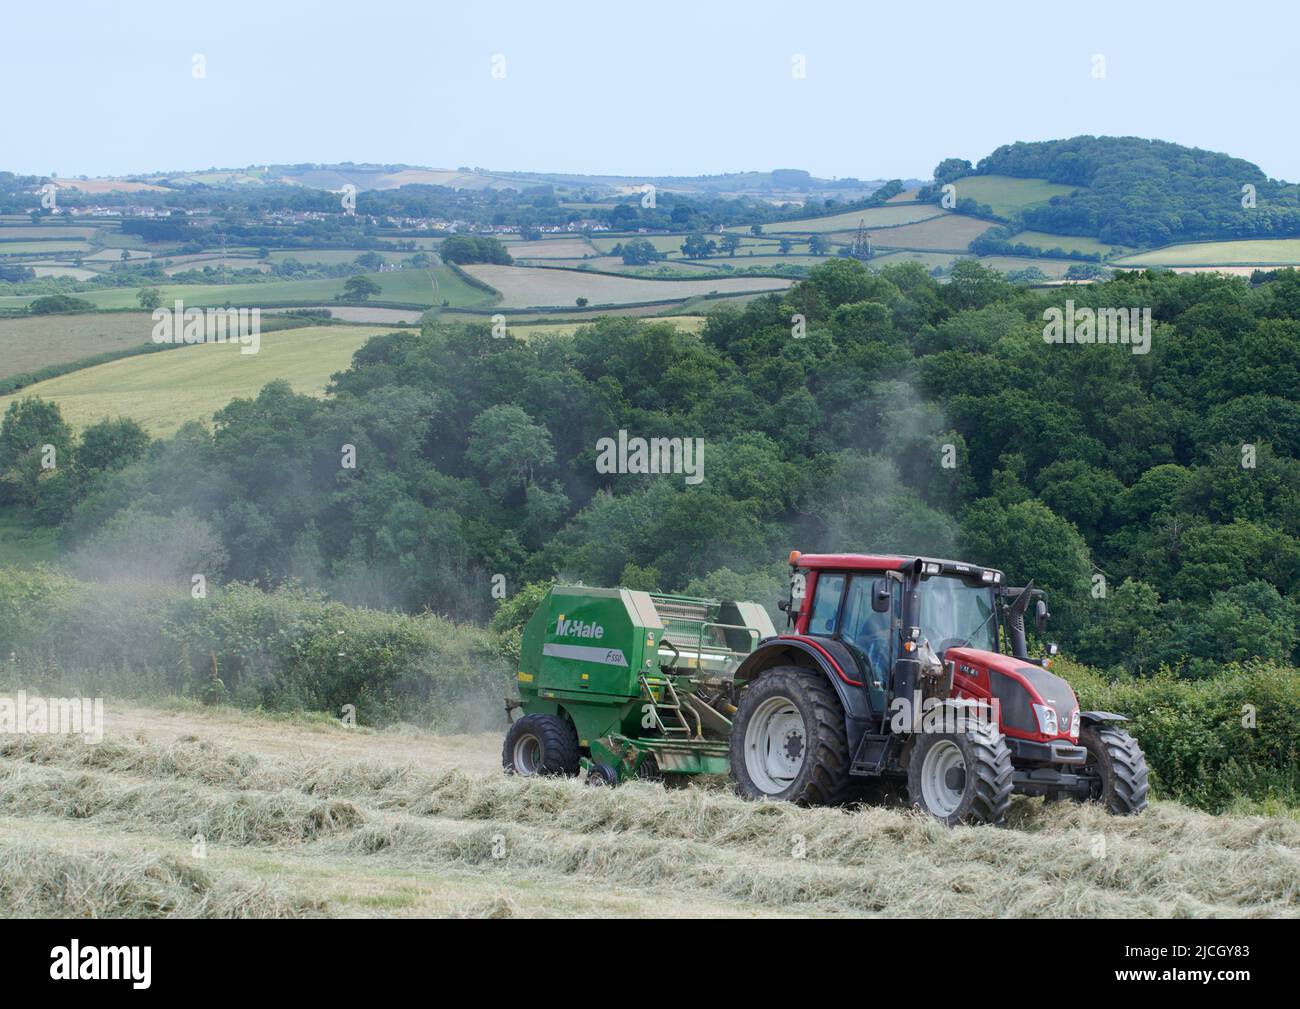 UK Weather: 13 Jun 2022, Partly Cloudy, Dry and Hot. Farlacombe, Devon, UK. Credit: Will Tudor/Alamy Live News Stock Photo